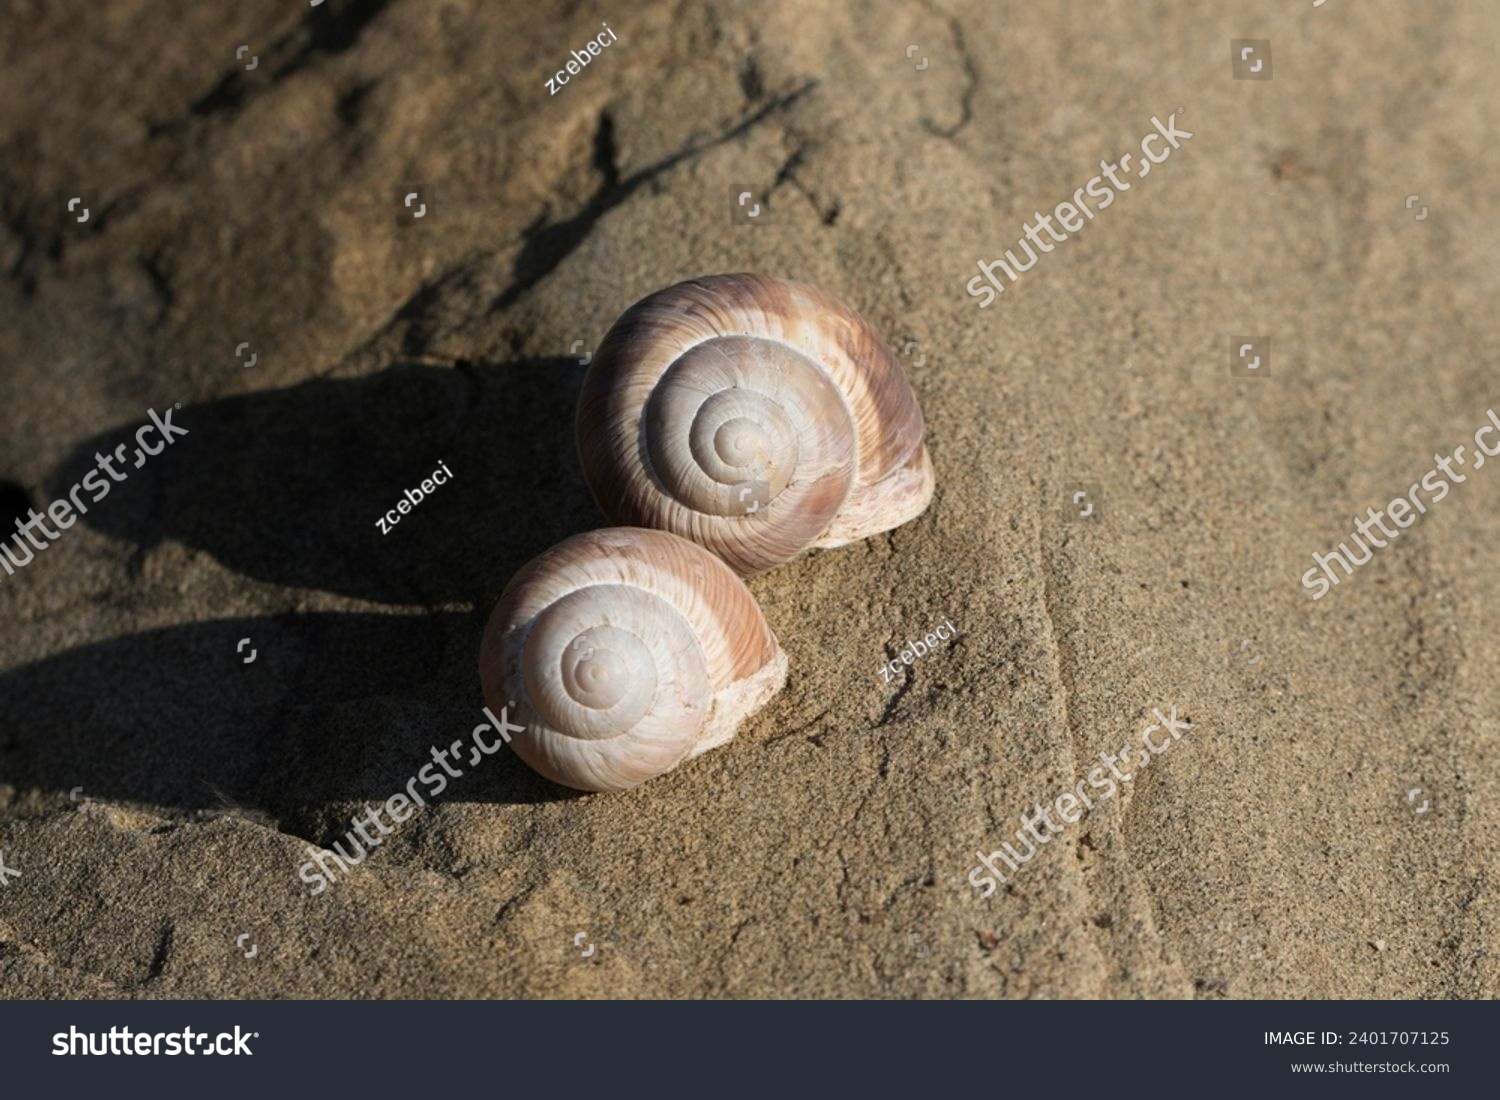 Two Adana snail (Helix asemnis) shell on stone in the autumn #2401707125